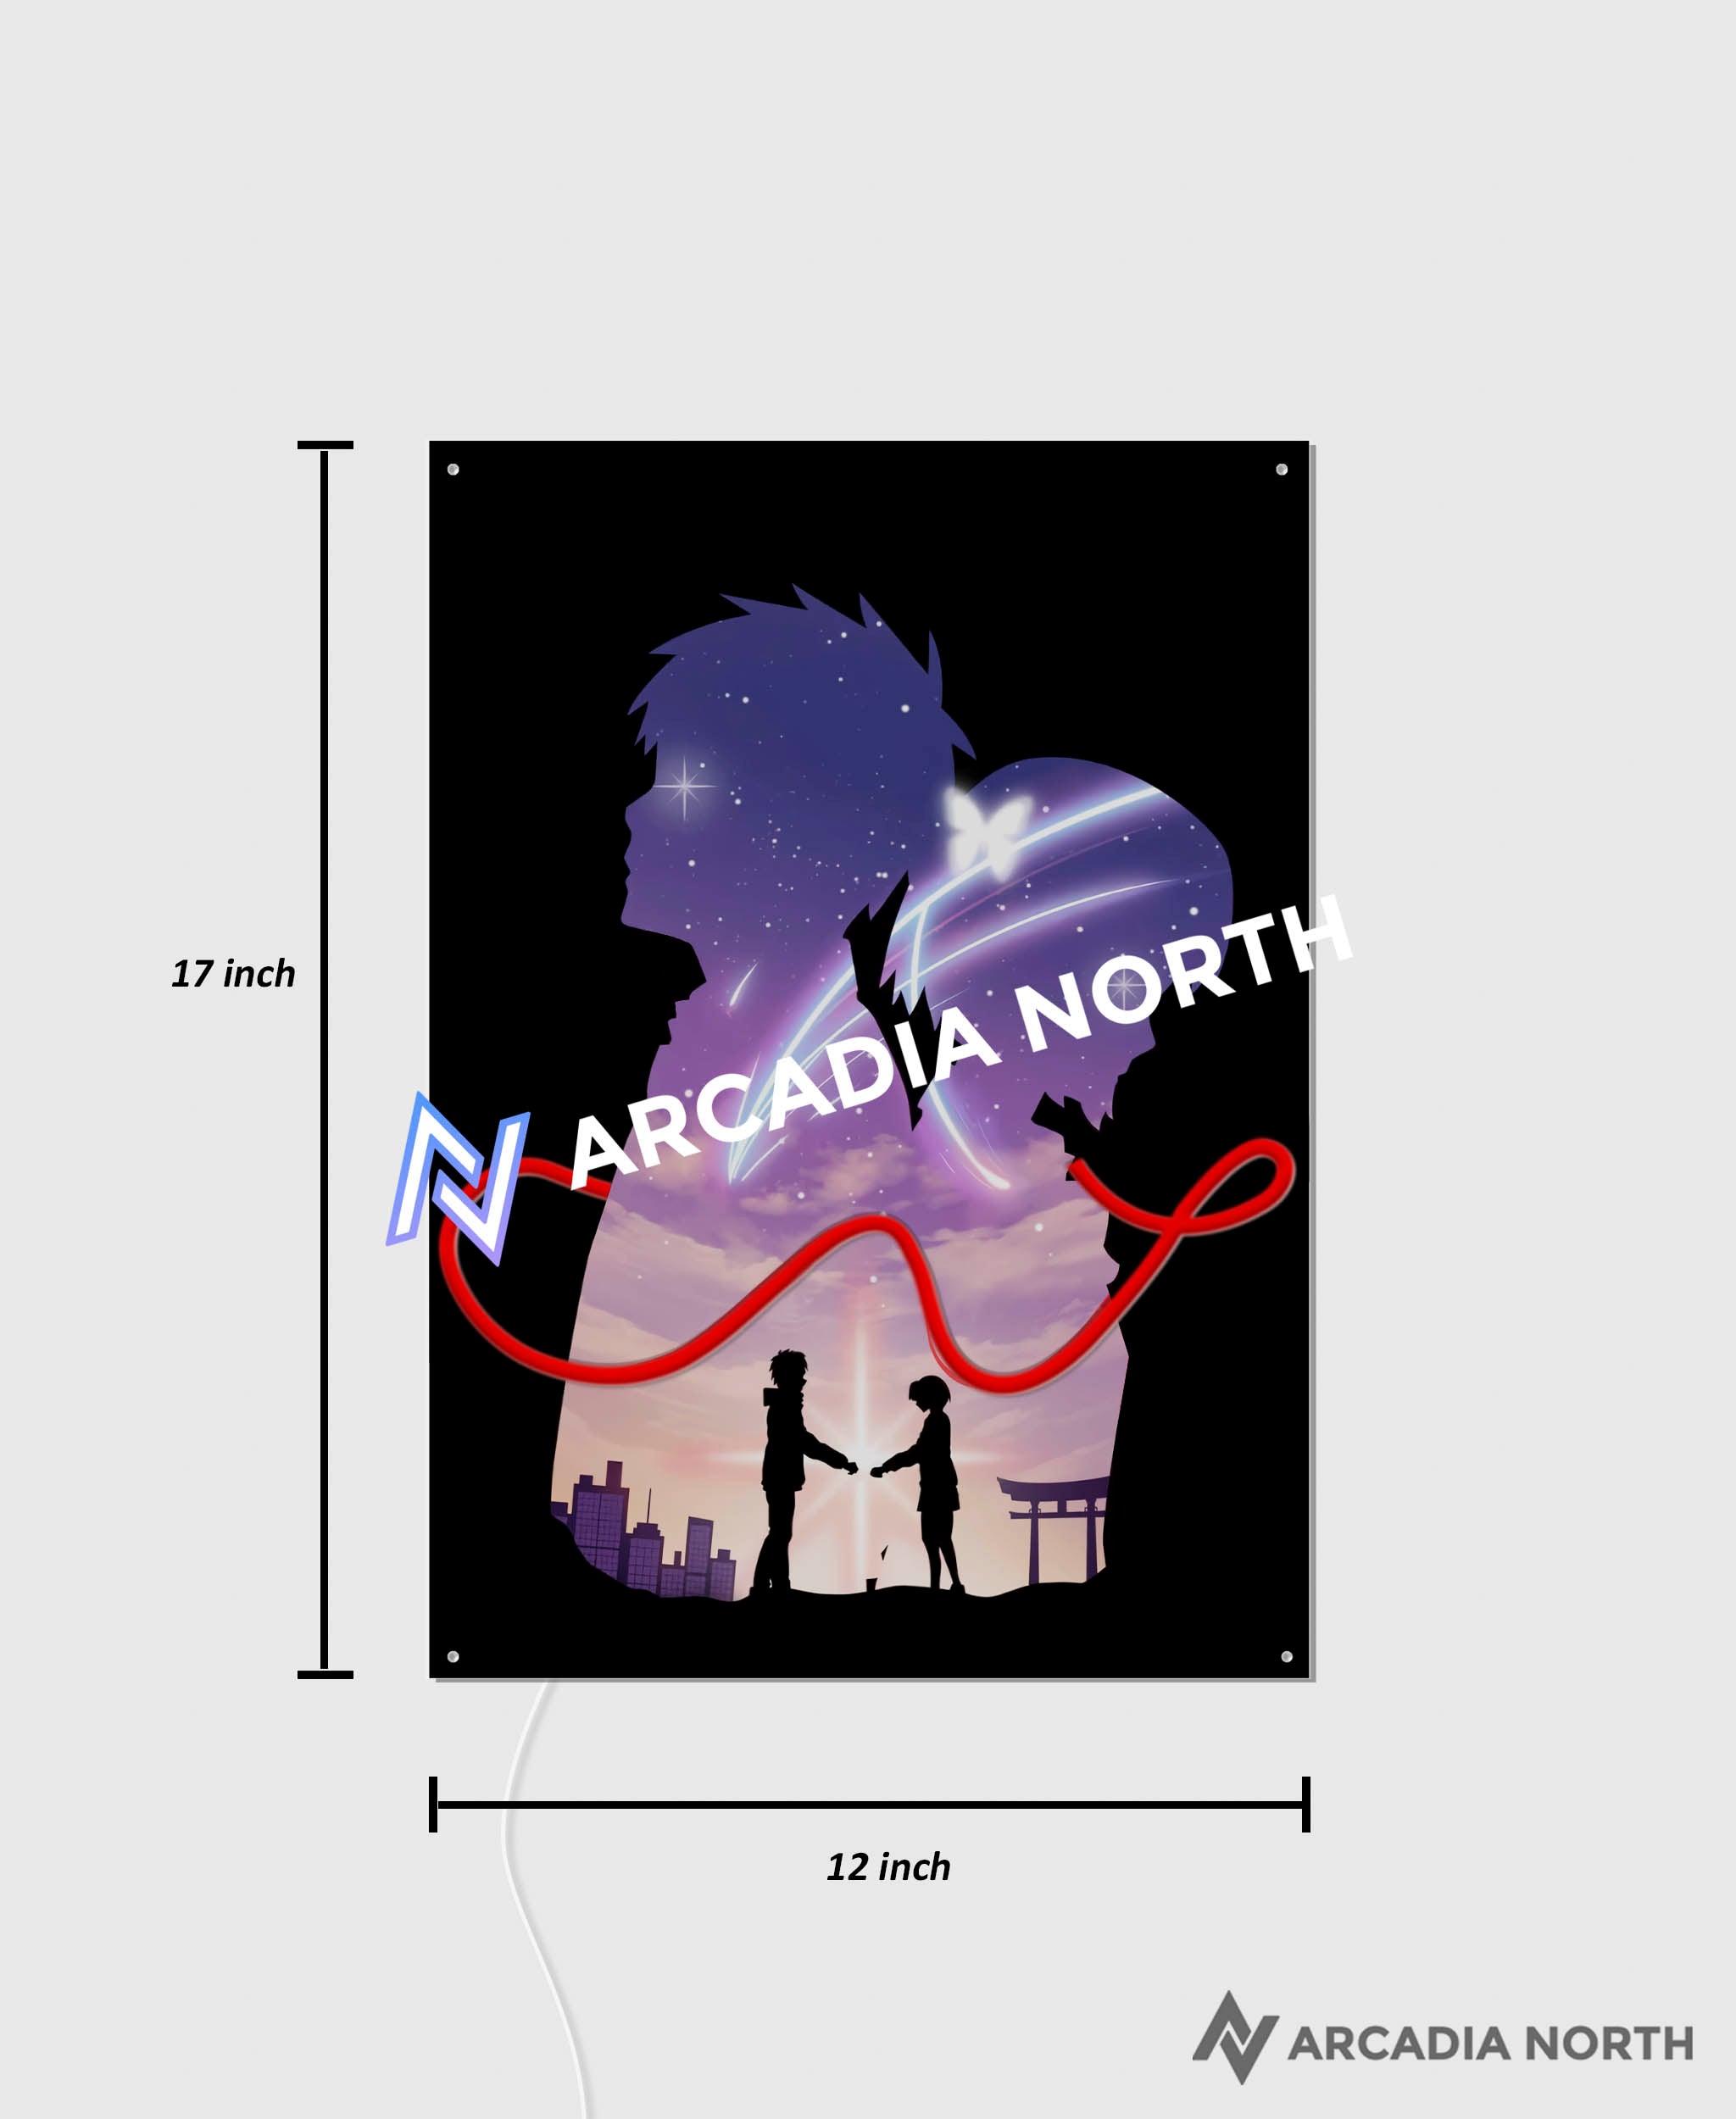 Arcadia North AURALIGHT Original LED Poster featuring the Makoto Shinkai anime Your Name Kimi no Na wa with Mitsuha and Taki connected by the red string of fate. Illuminated by glowing neon LED lights. UV-printed on acrylic.